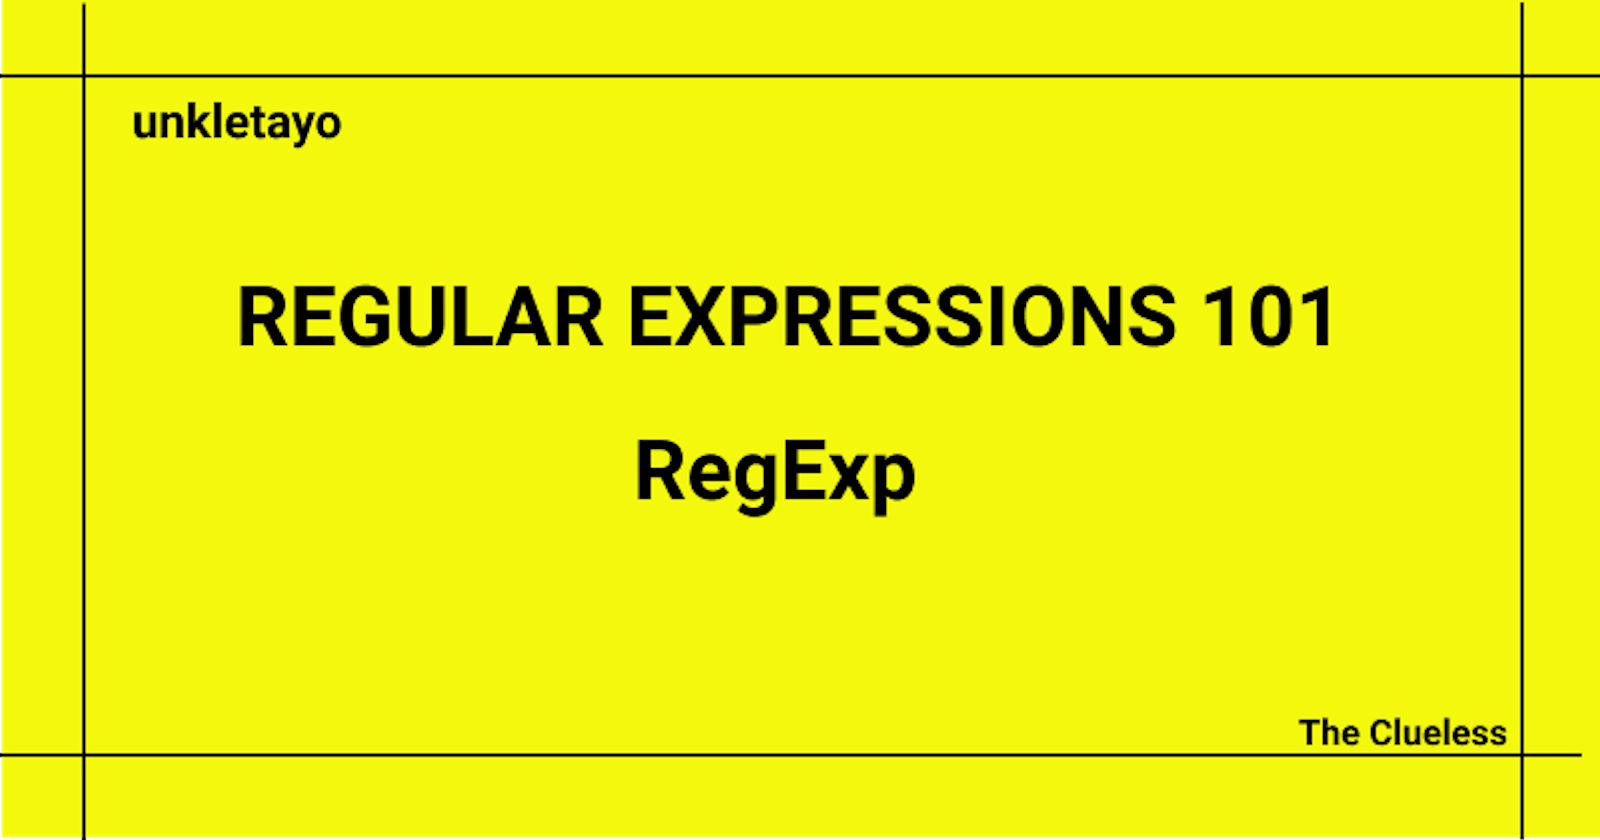 Regular Expressions 101 Part 1: Declarations and Methods